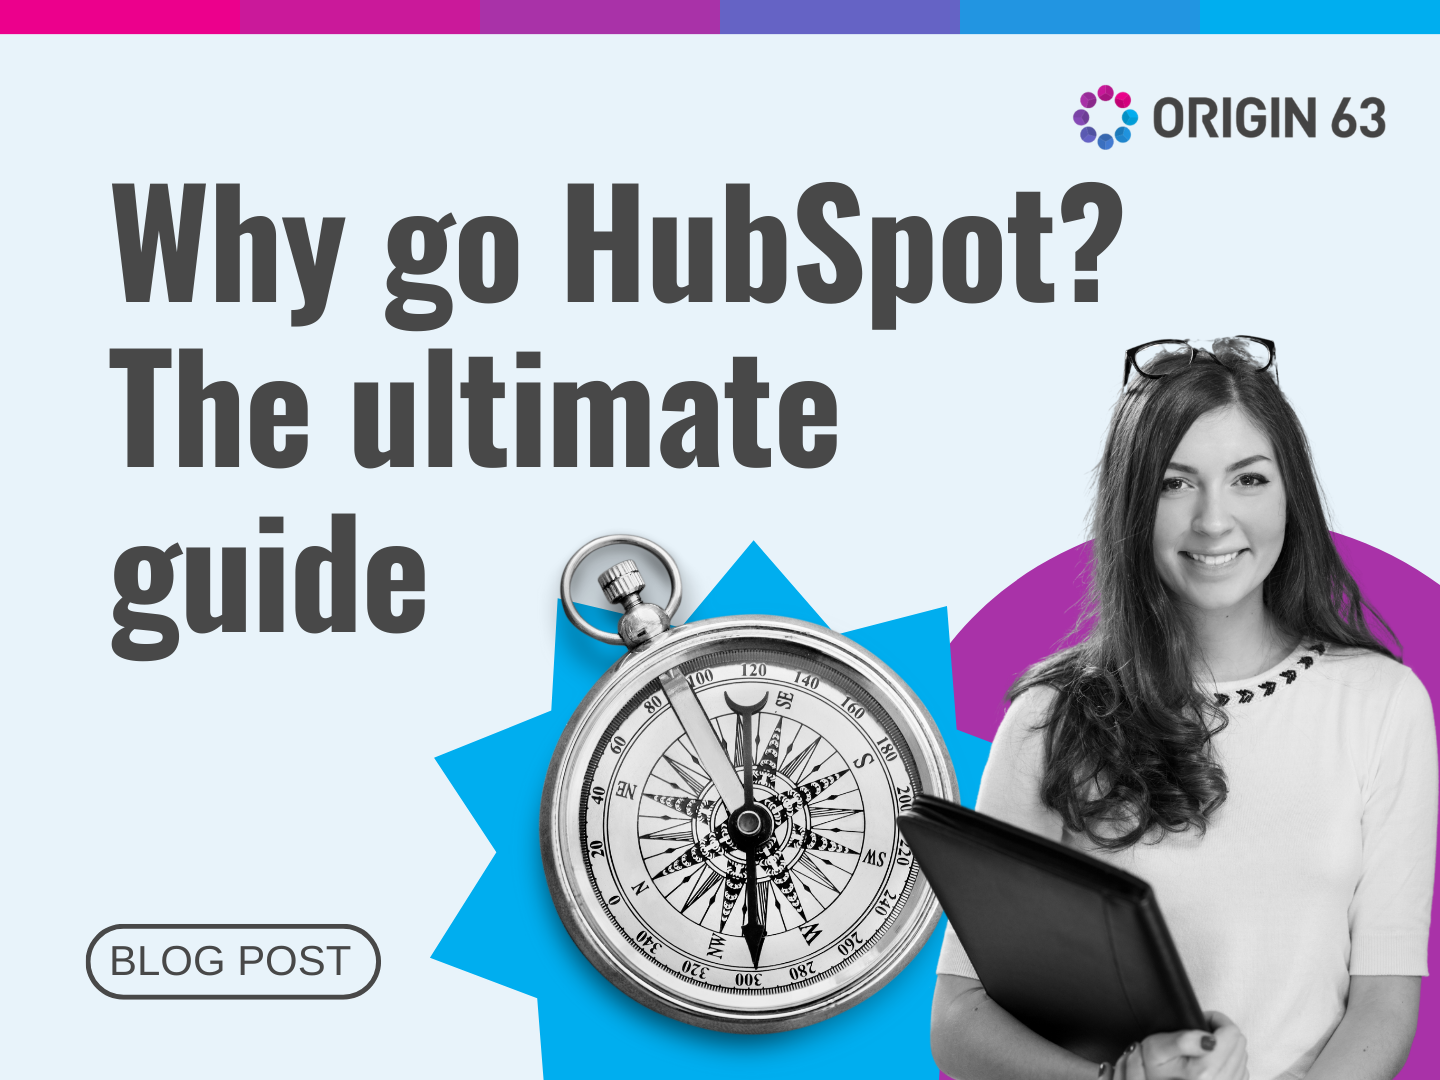 If you are wondering 'Why go HubSpot?' This guide will provide you with information from different perspectives: technology, roles, and challenges.